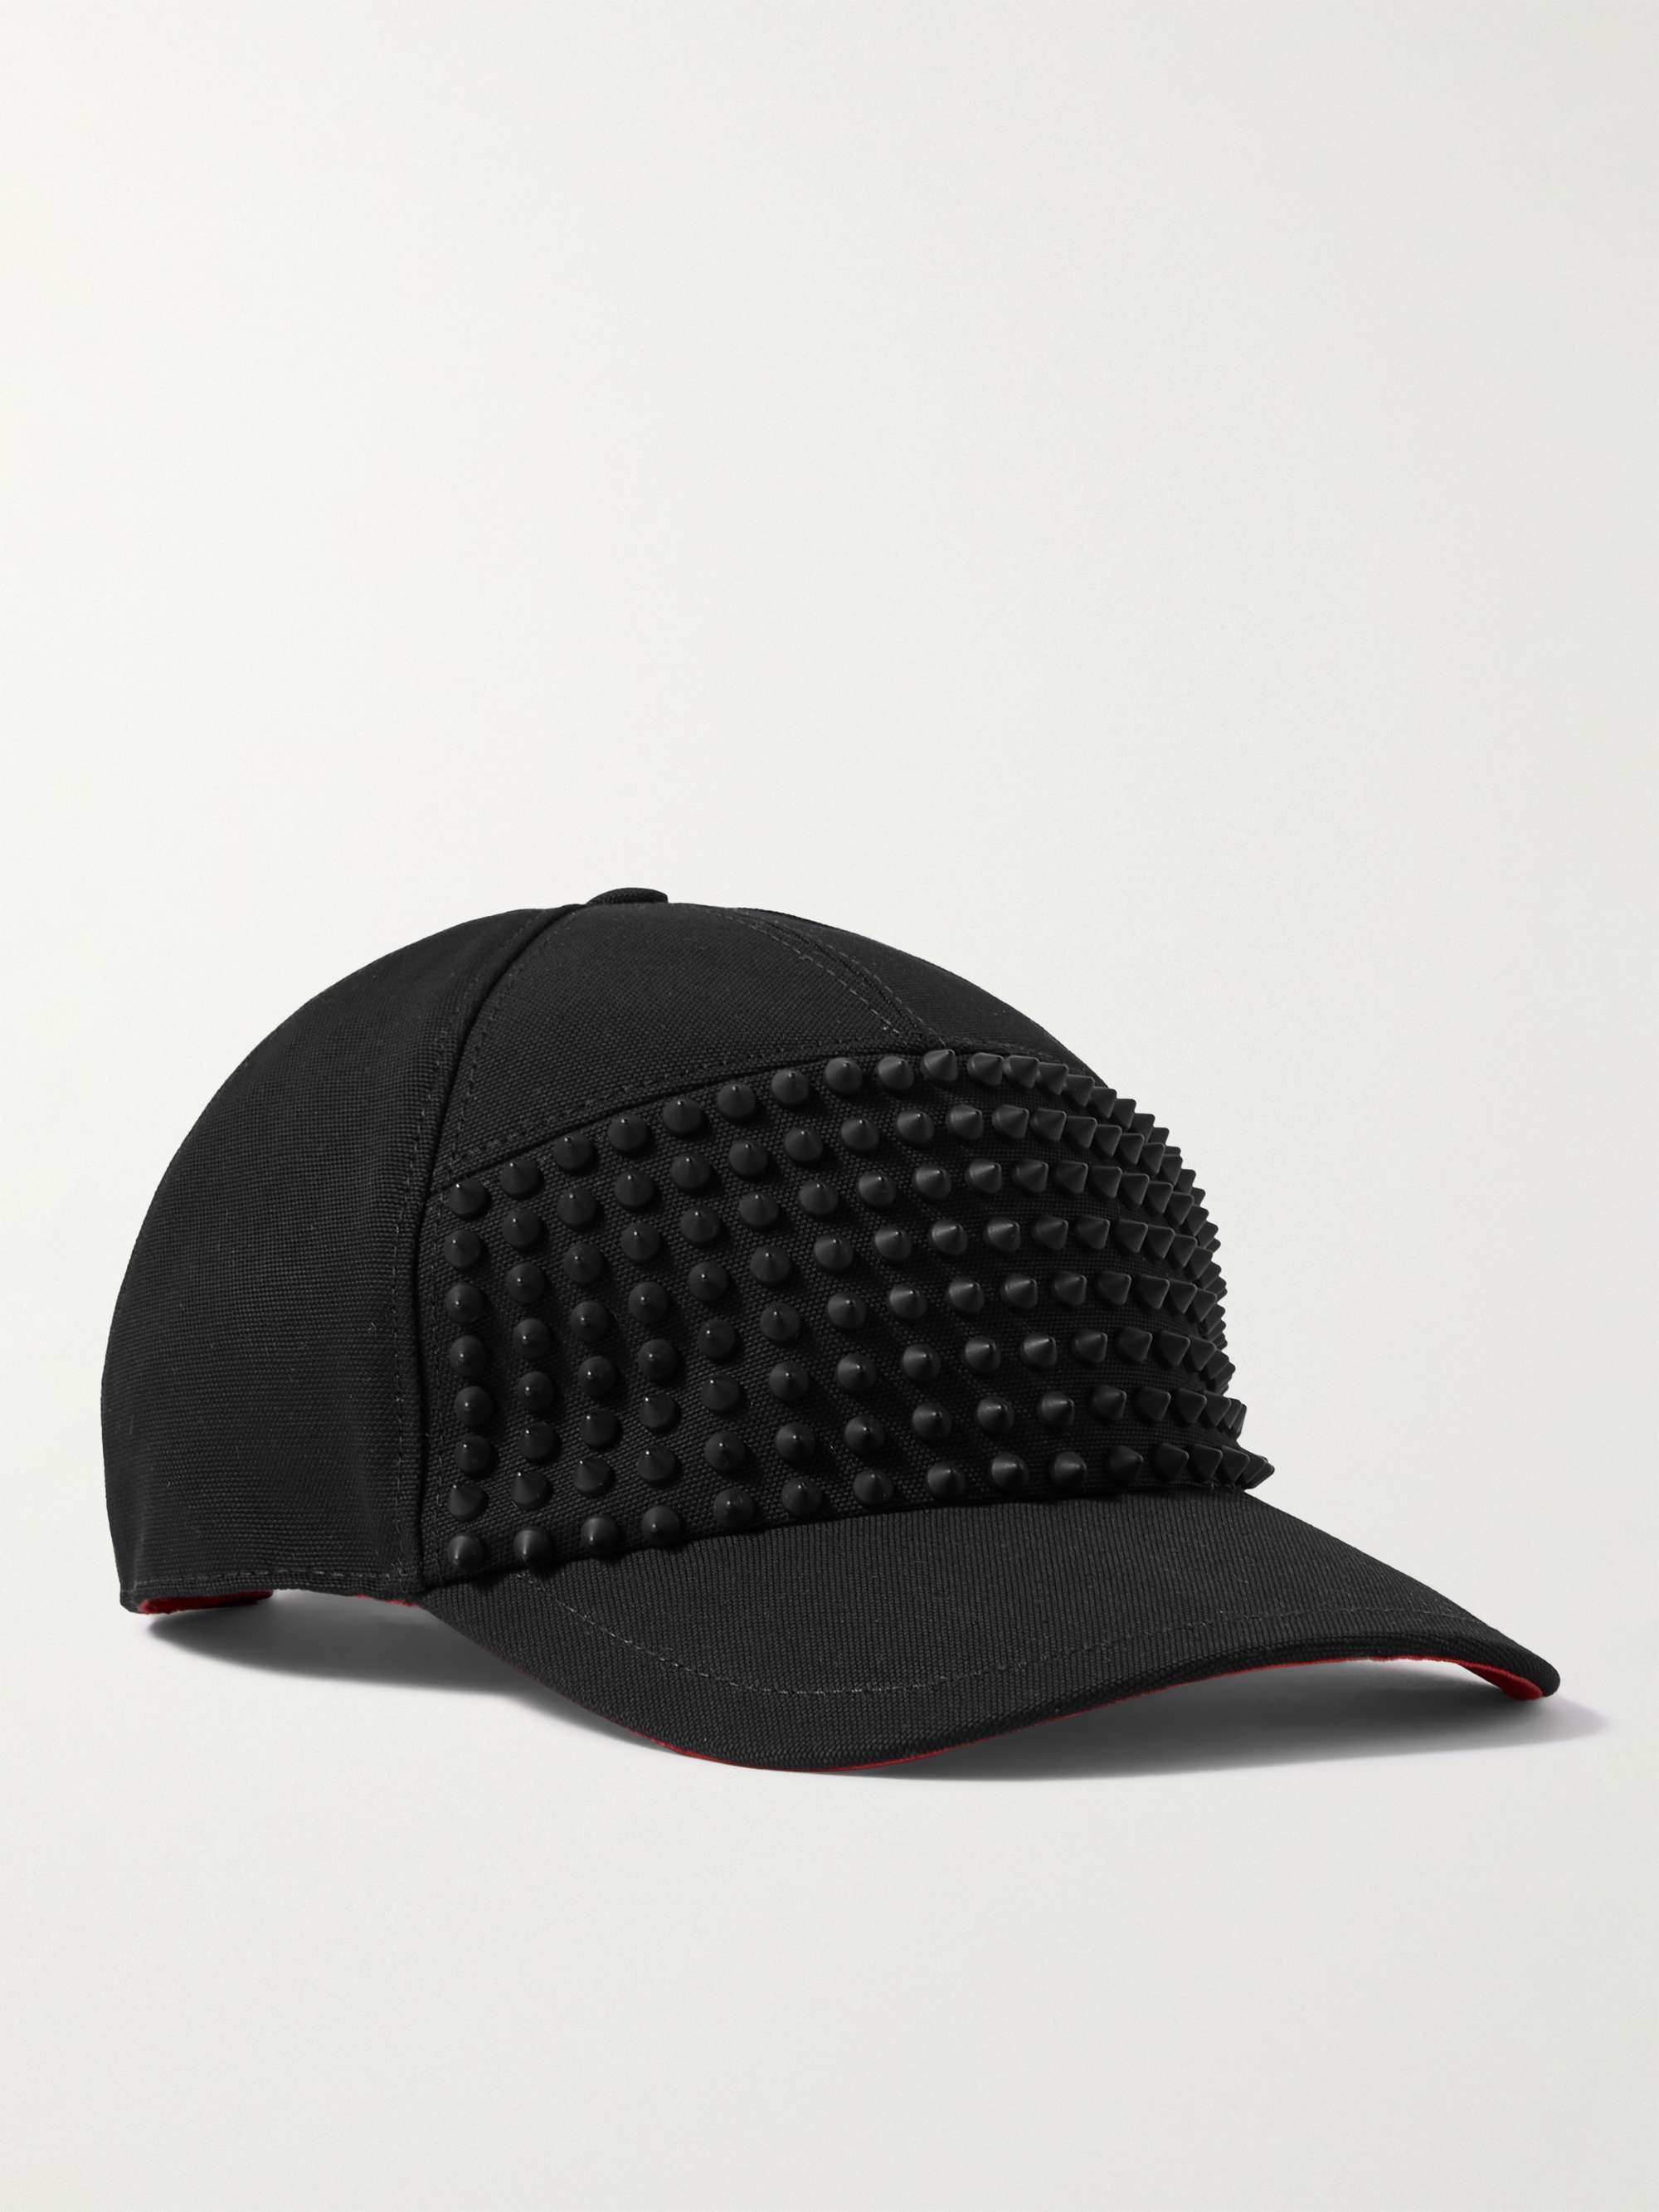 CHRISTIAN LOUBOUTIN Spiked Cotton-Canvas Hat for Men